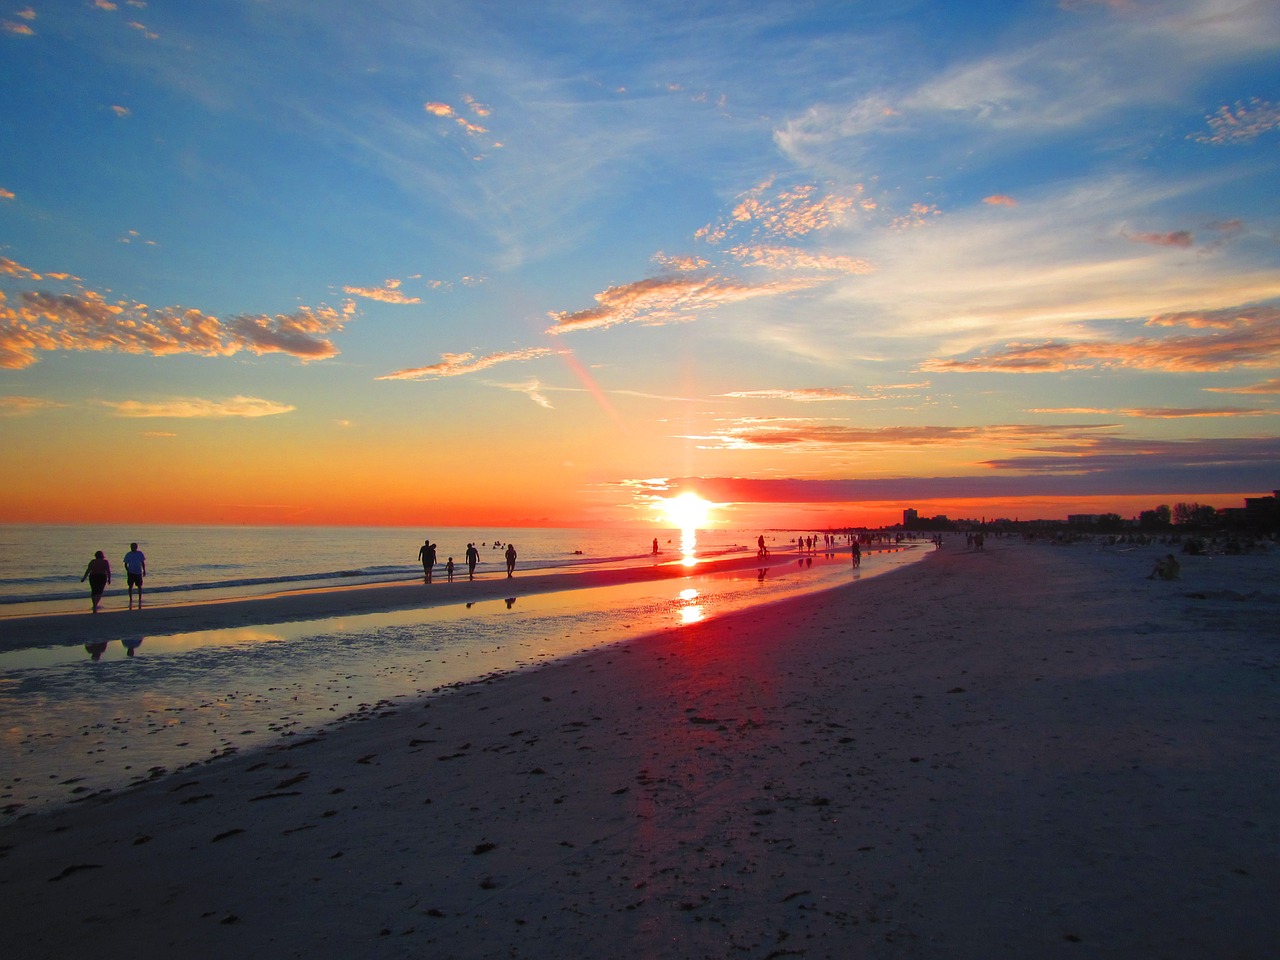 How to Spend a Romantic Weekend in Siesta Key this Valentine’s Day